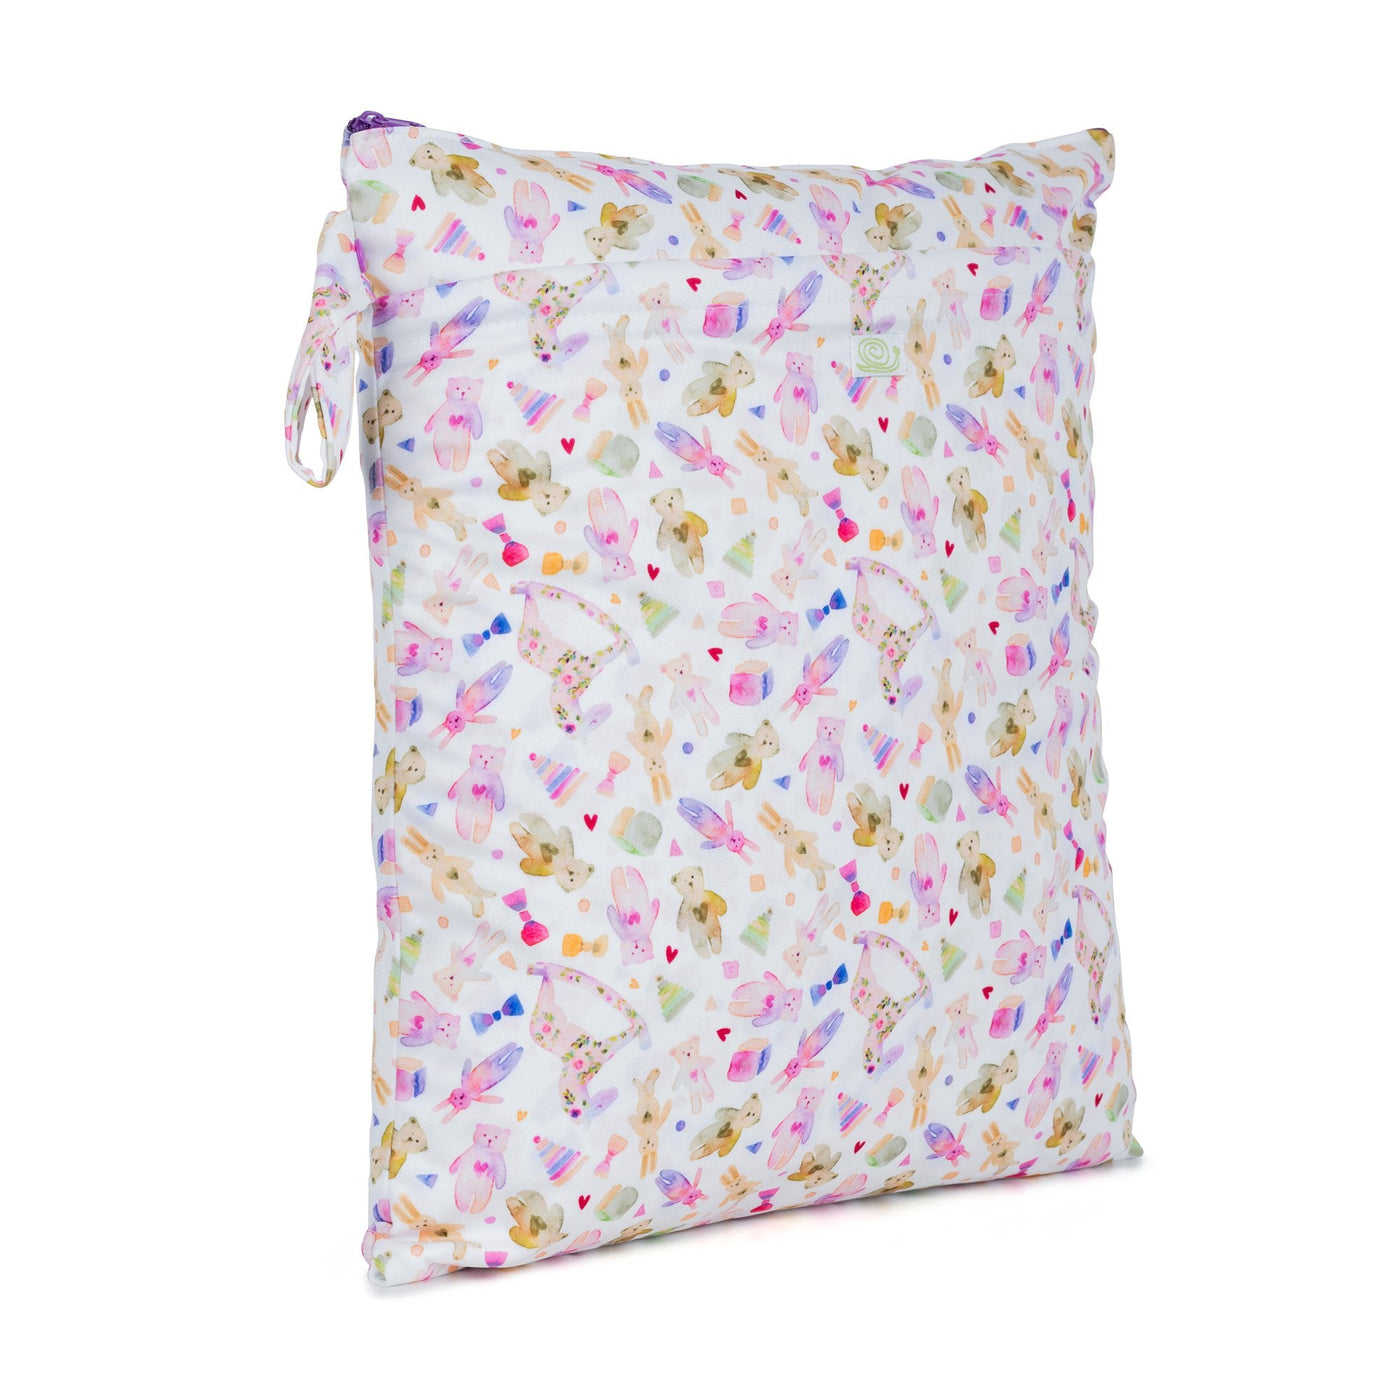 Baba + BooMedium Double Zip Reusable Nappy Storage BagColour: Vintage Toysreusable nappies buckets & accessoriesEarthlets